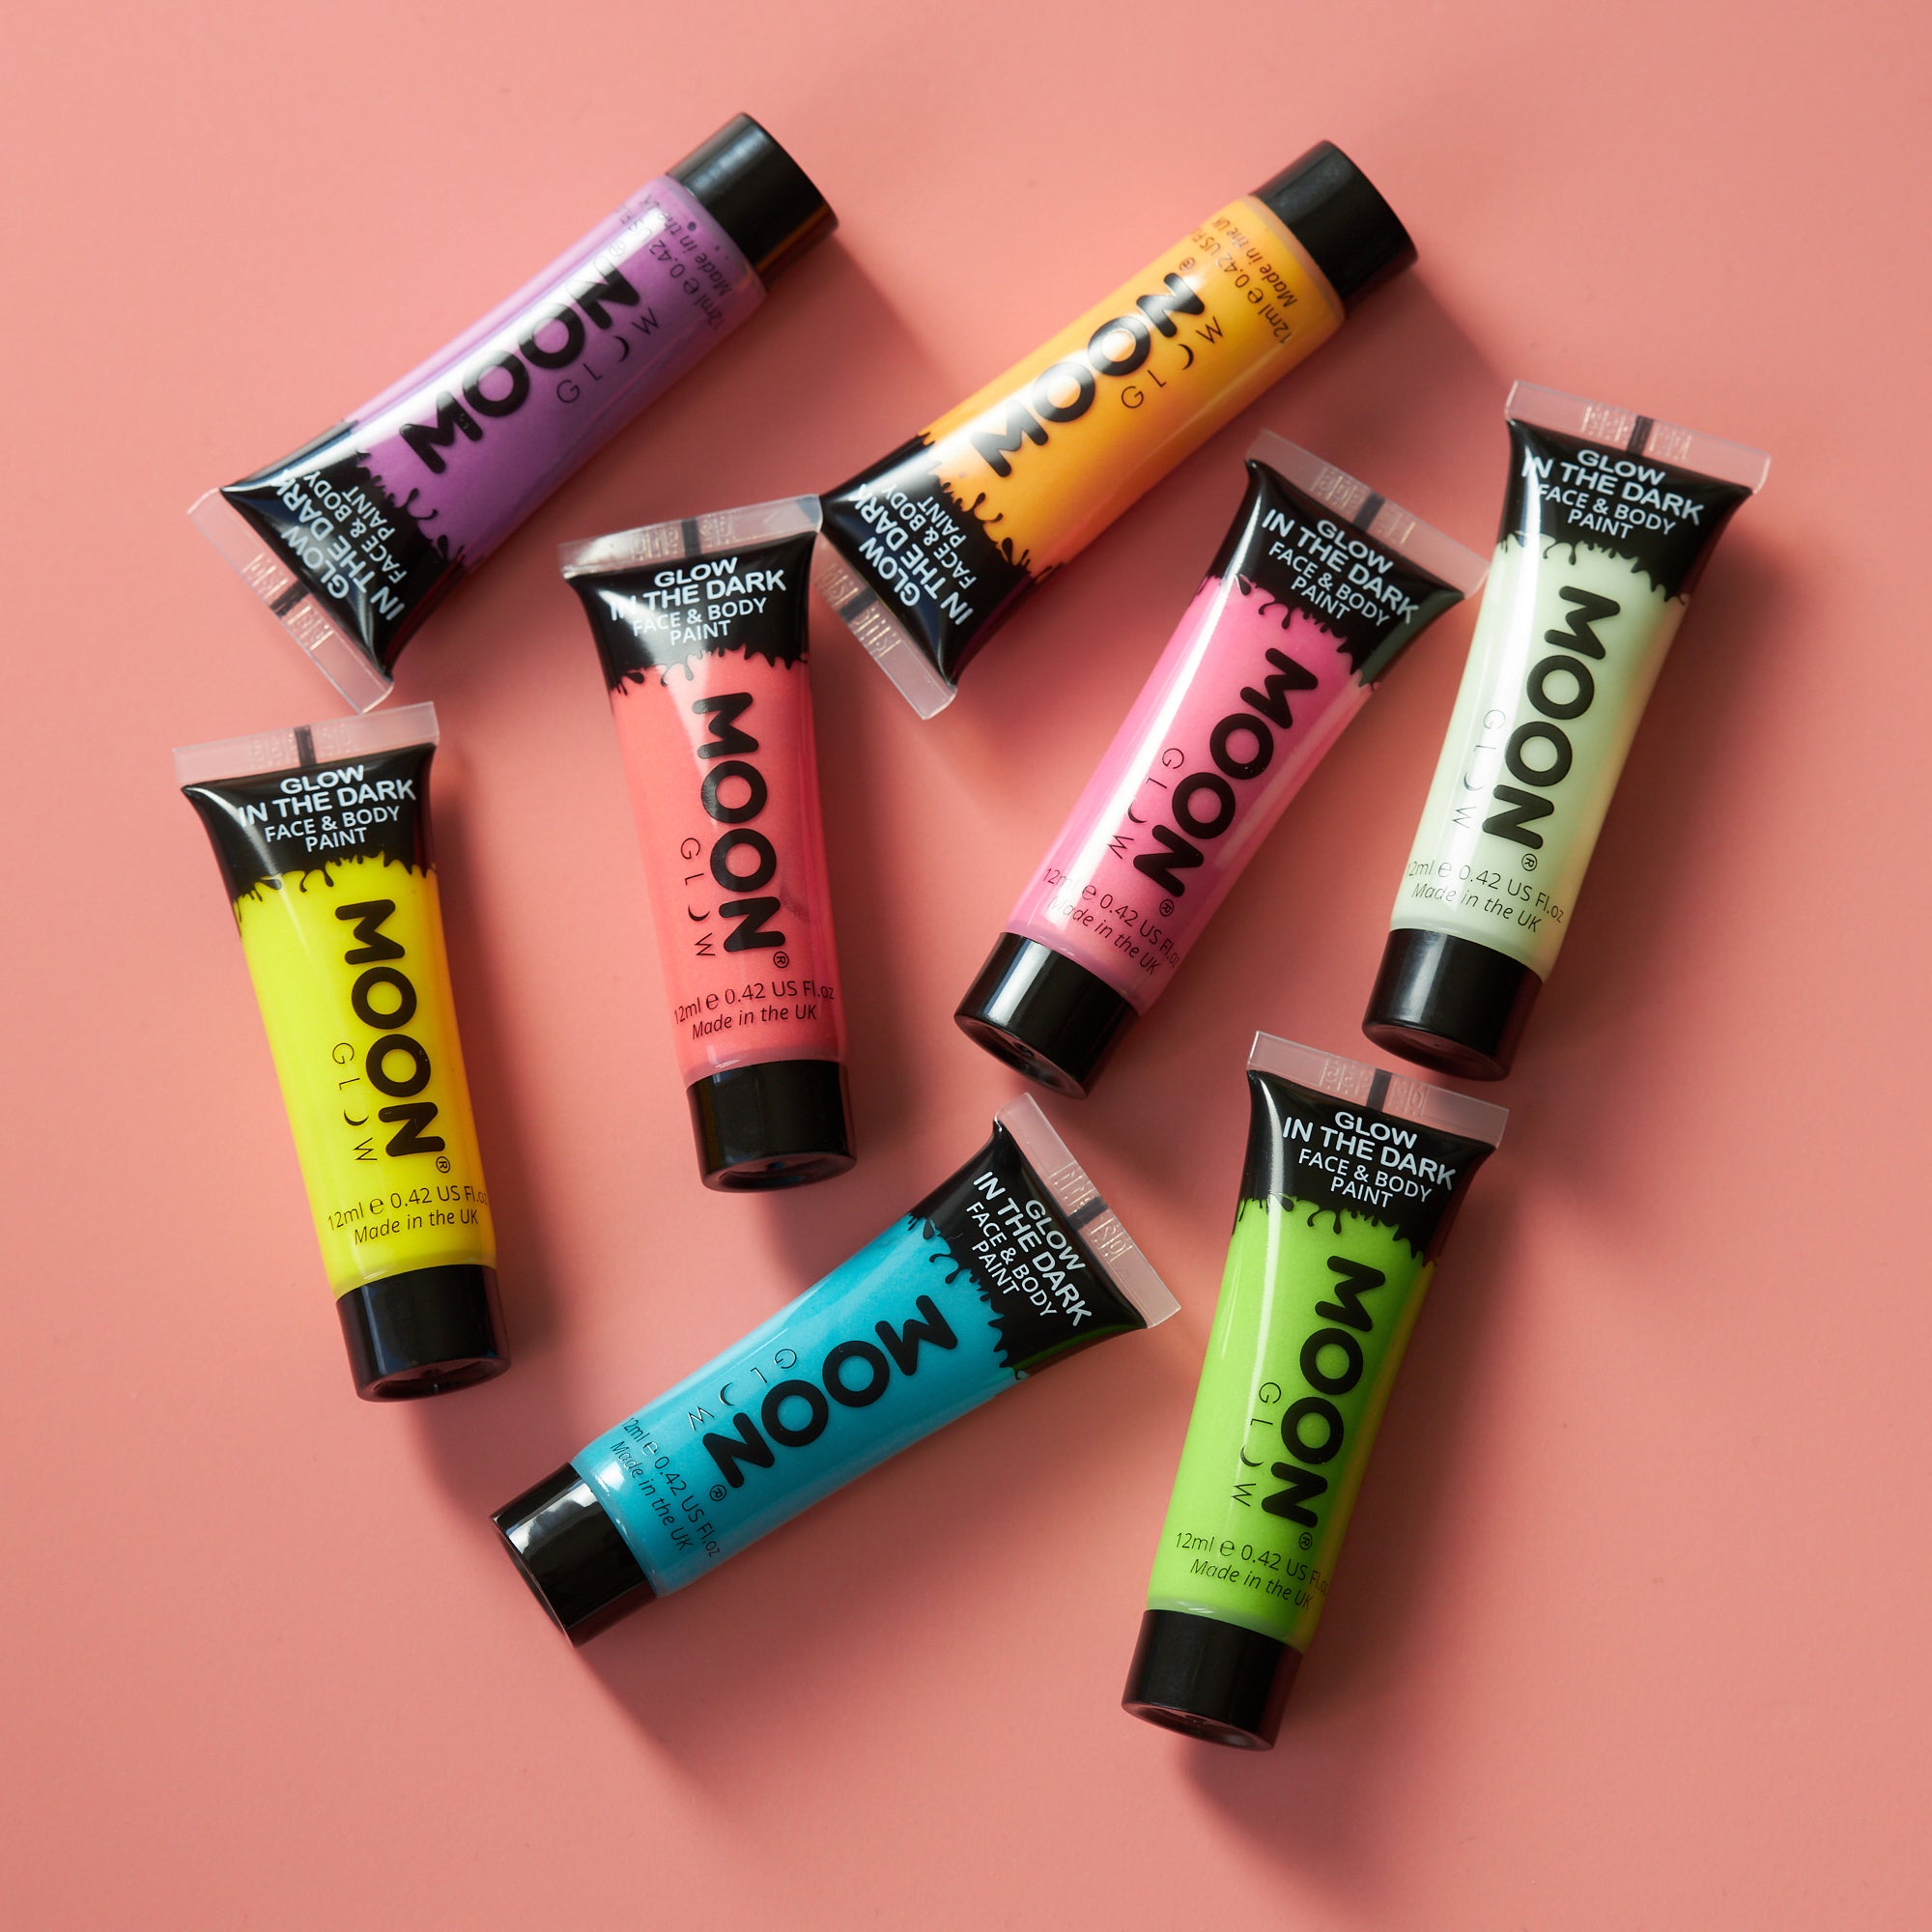 Moon Glow - Blacklight Neon Face Paint Stick / Body Crayon makeup for the  Face & Body - Pastel set of 4 colours - Glows brightly under blacklights